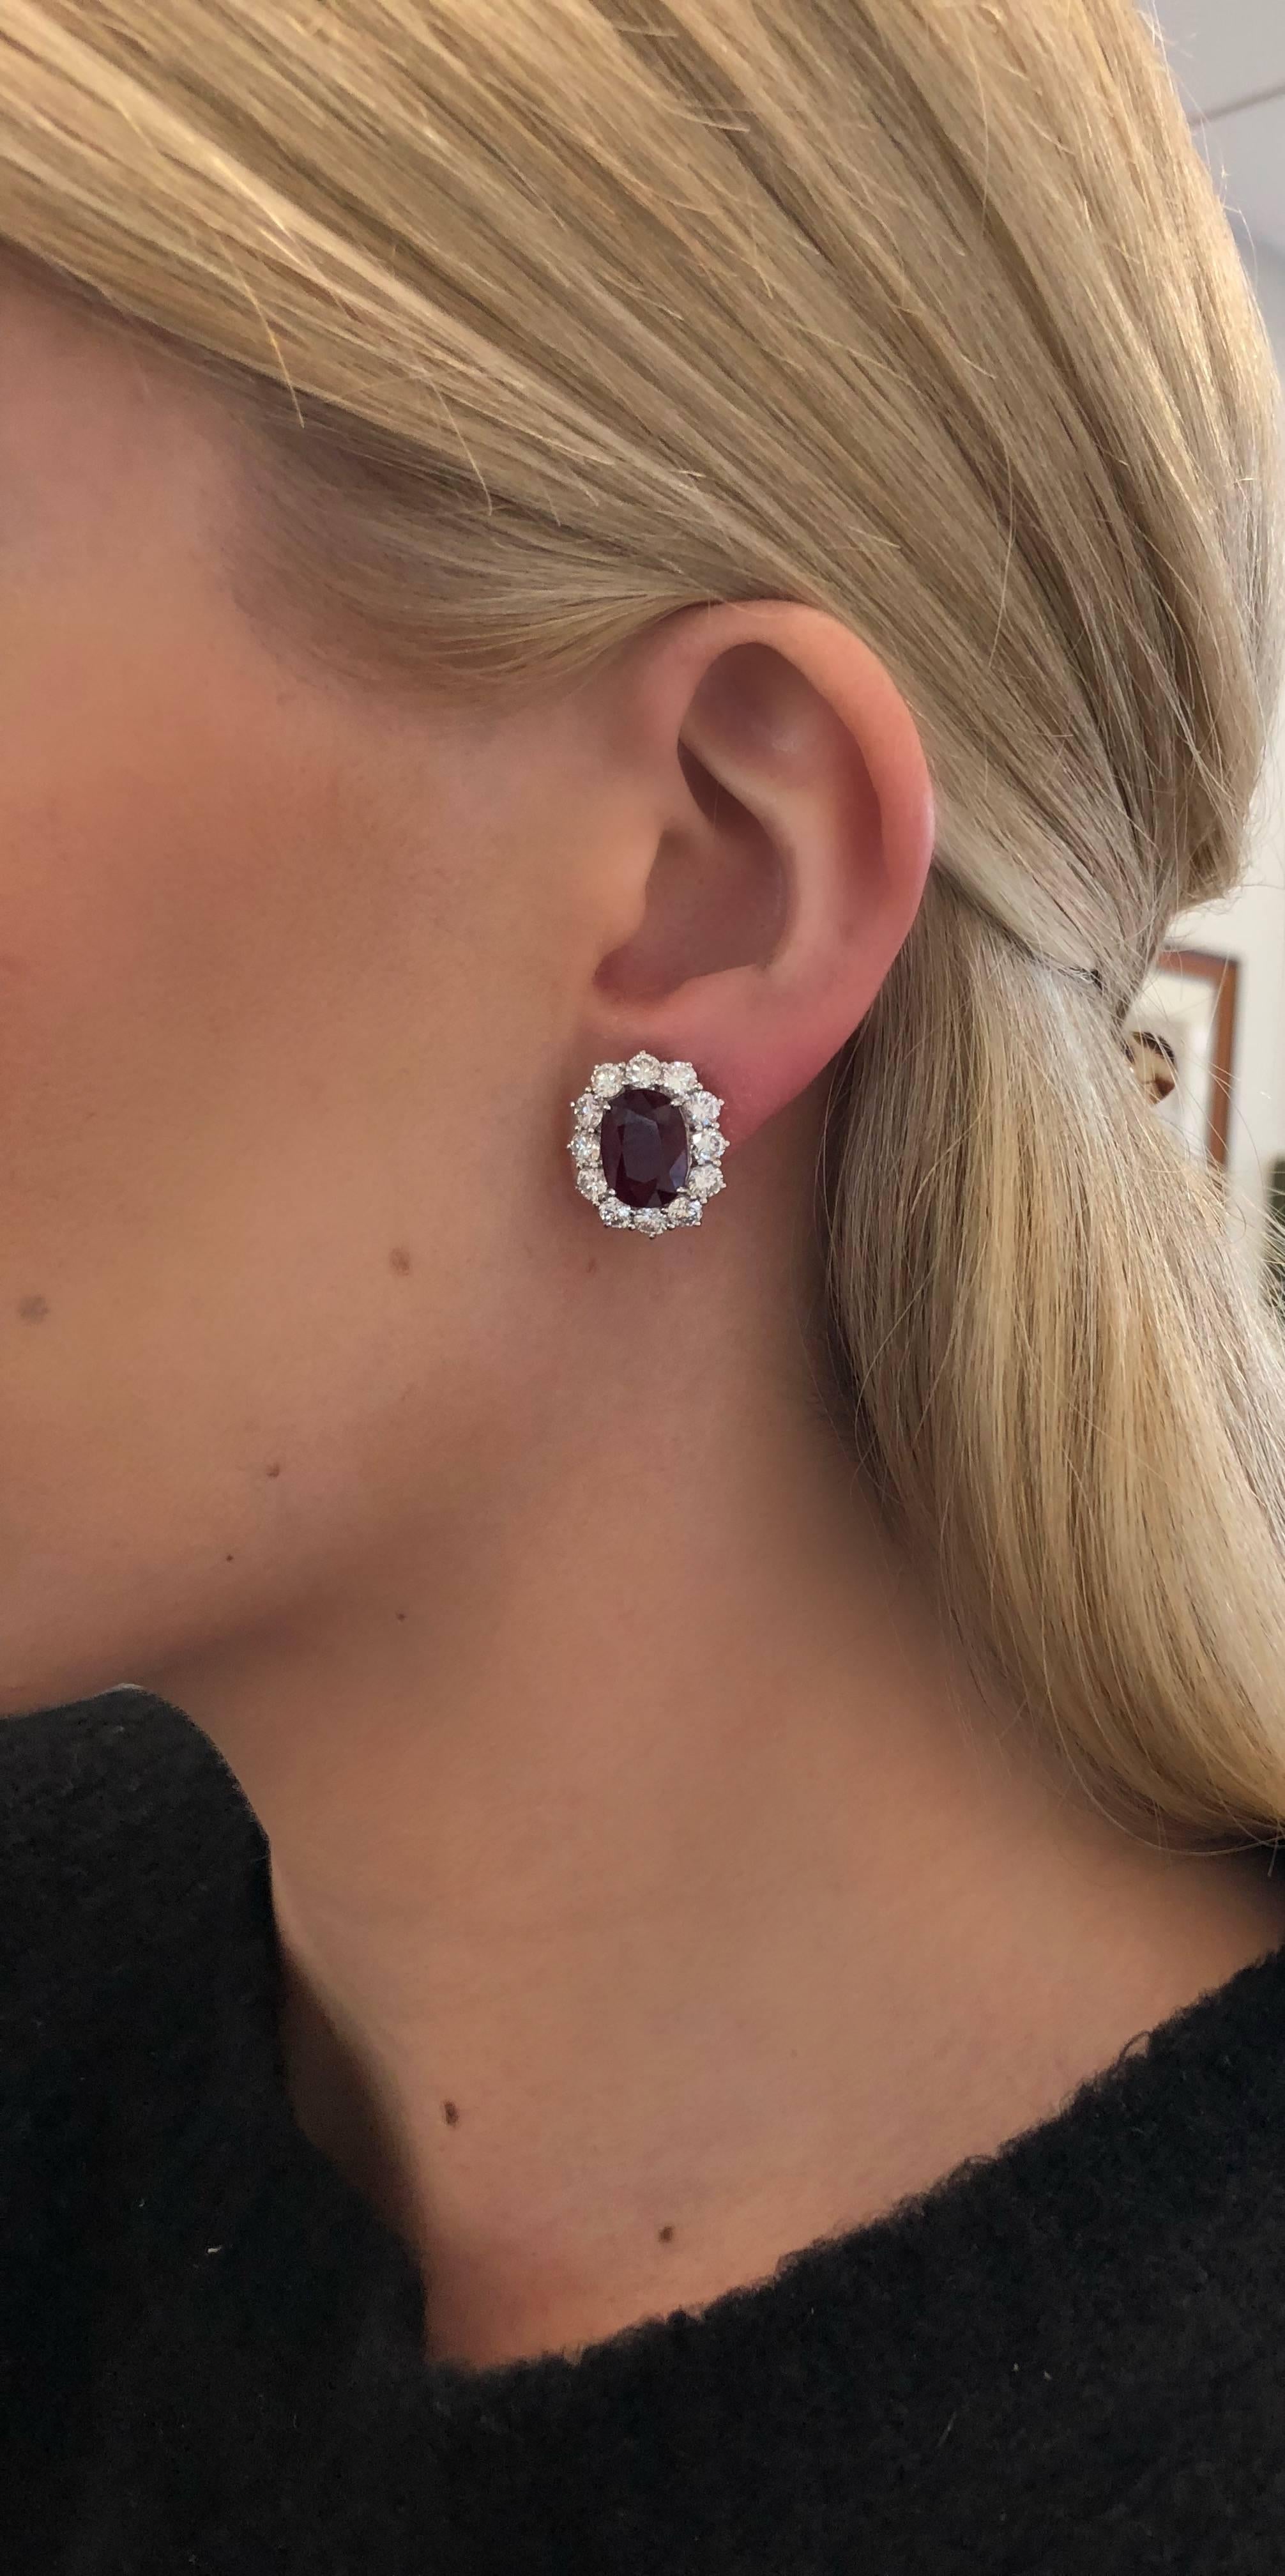 Classic yet wearable. A fine pair of ruby earrings, featuring a well-cut and attractive matched pair of impressive size oval rubies, each with a rich, red color weighing 3.95 and 4.00 carats. Set in 18 karat white gold with a surround of brilliant